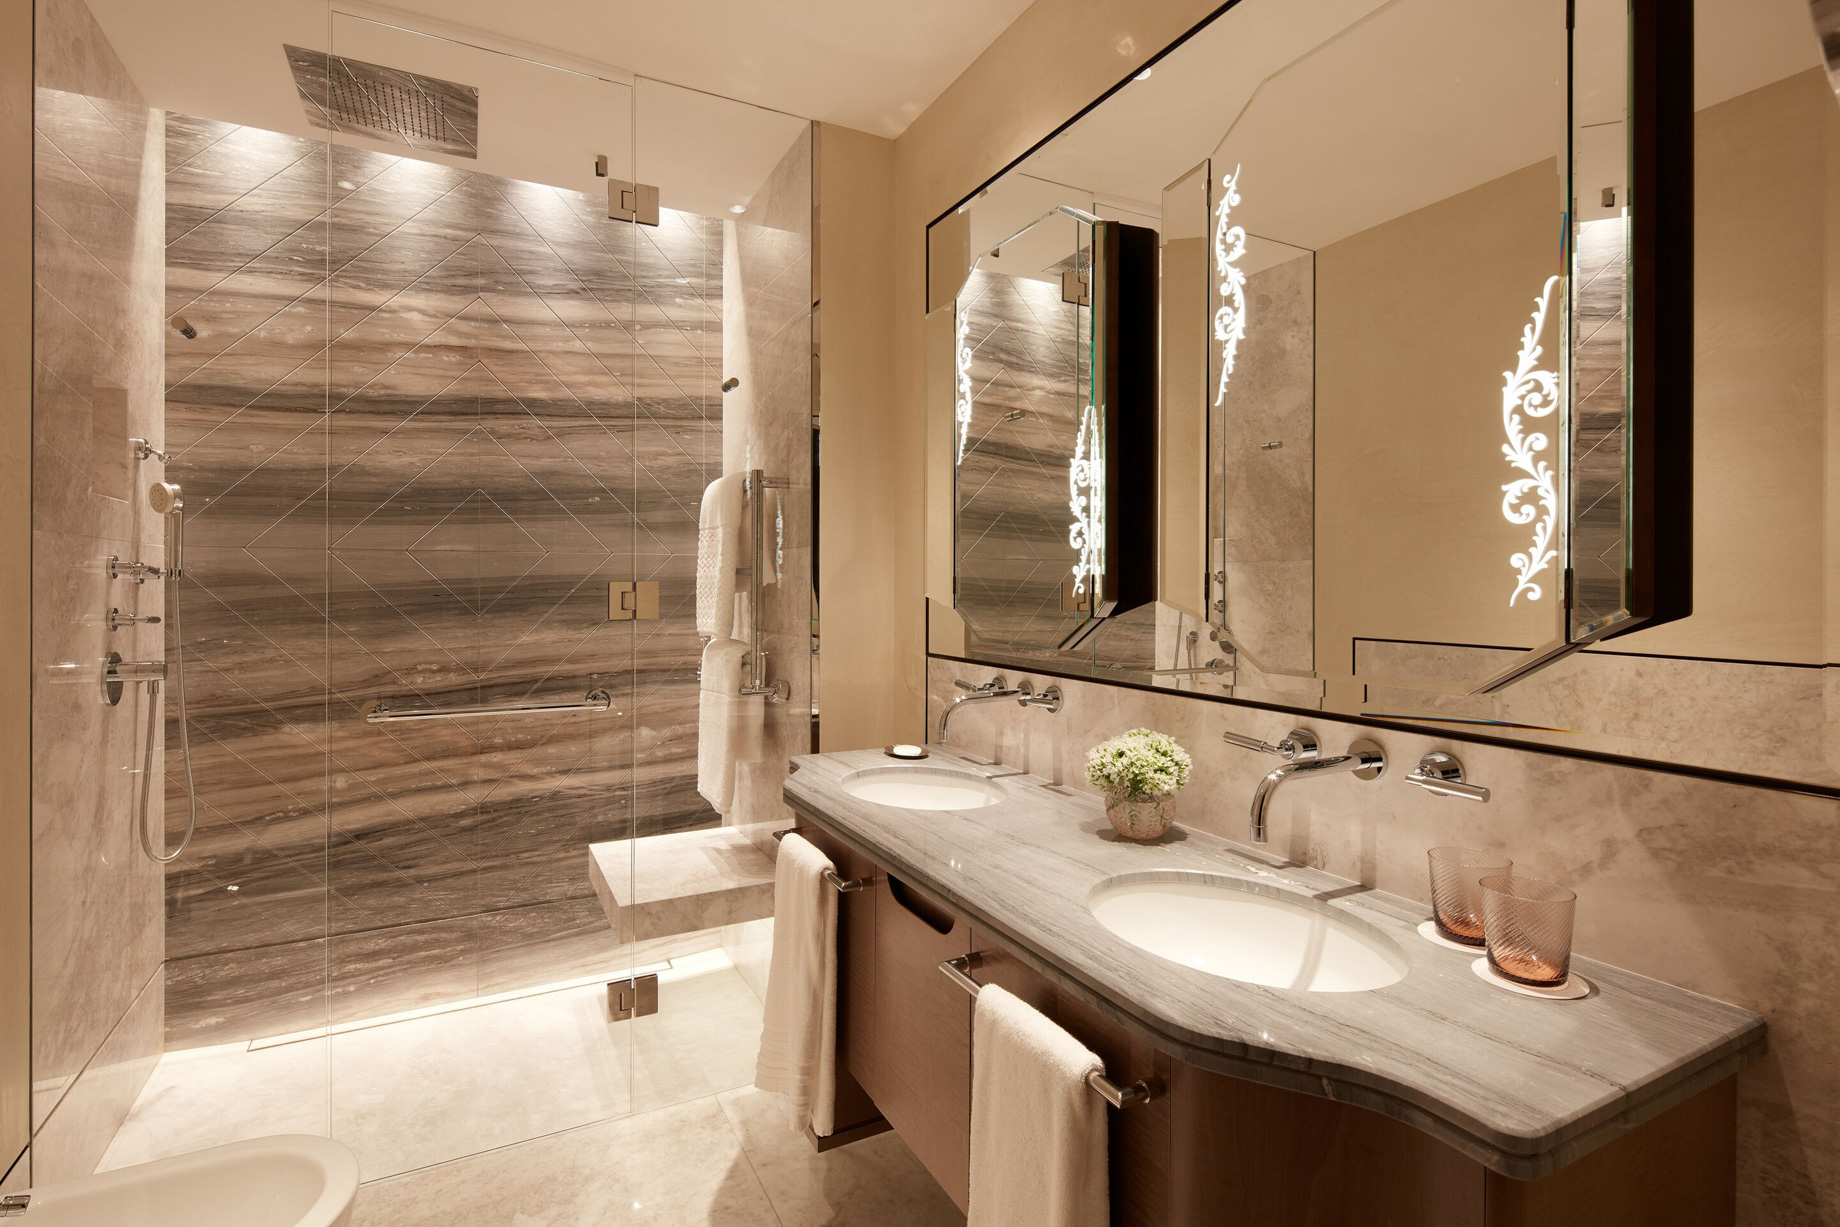 The St. Regis Venice Hotel - Venice, Italy - Guest Bathroom Vanity and Shower